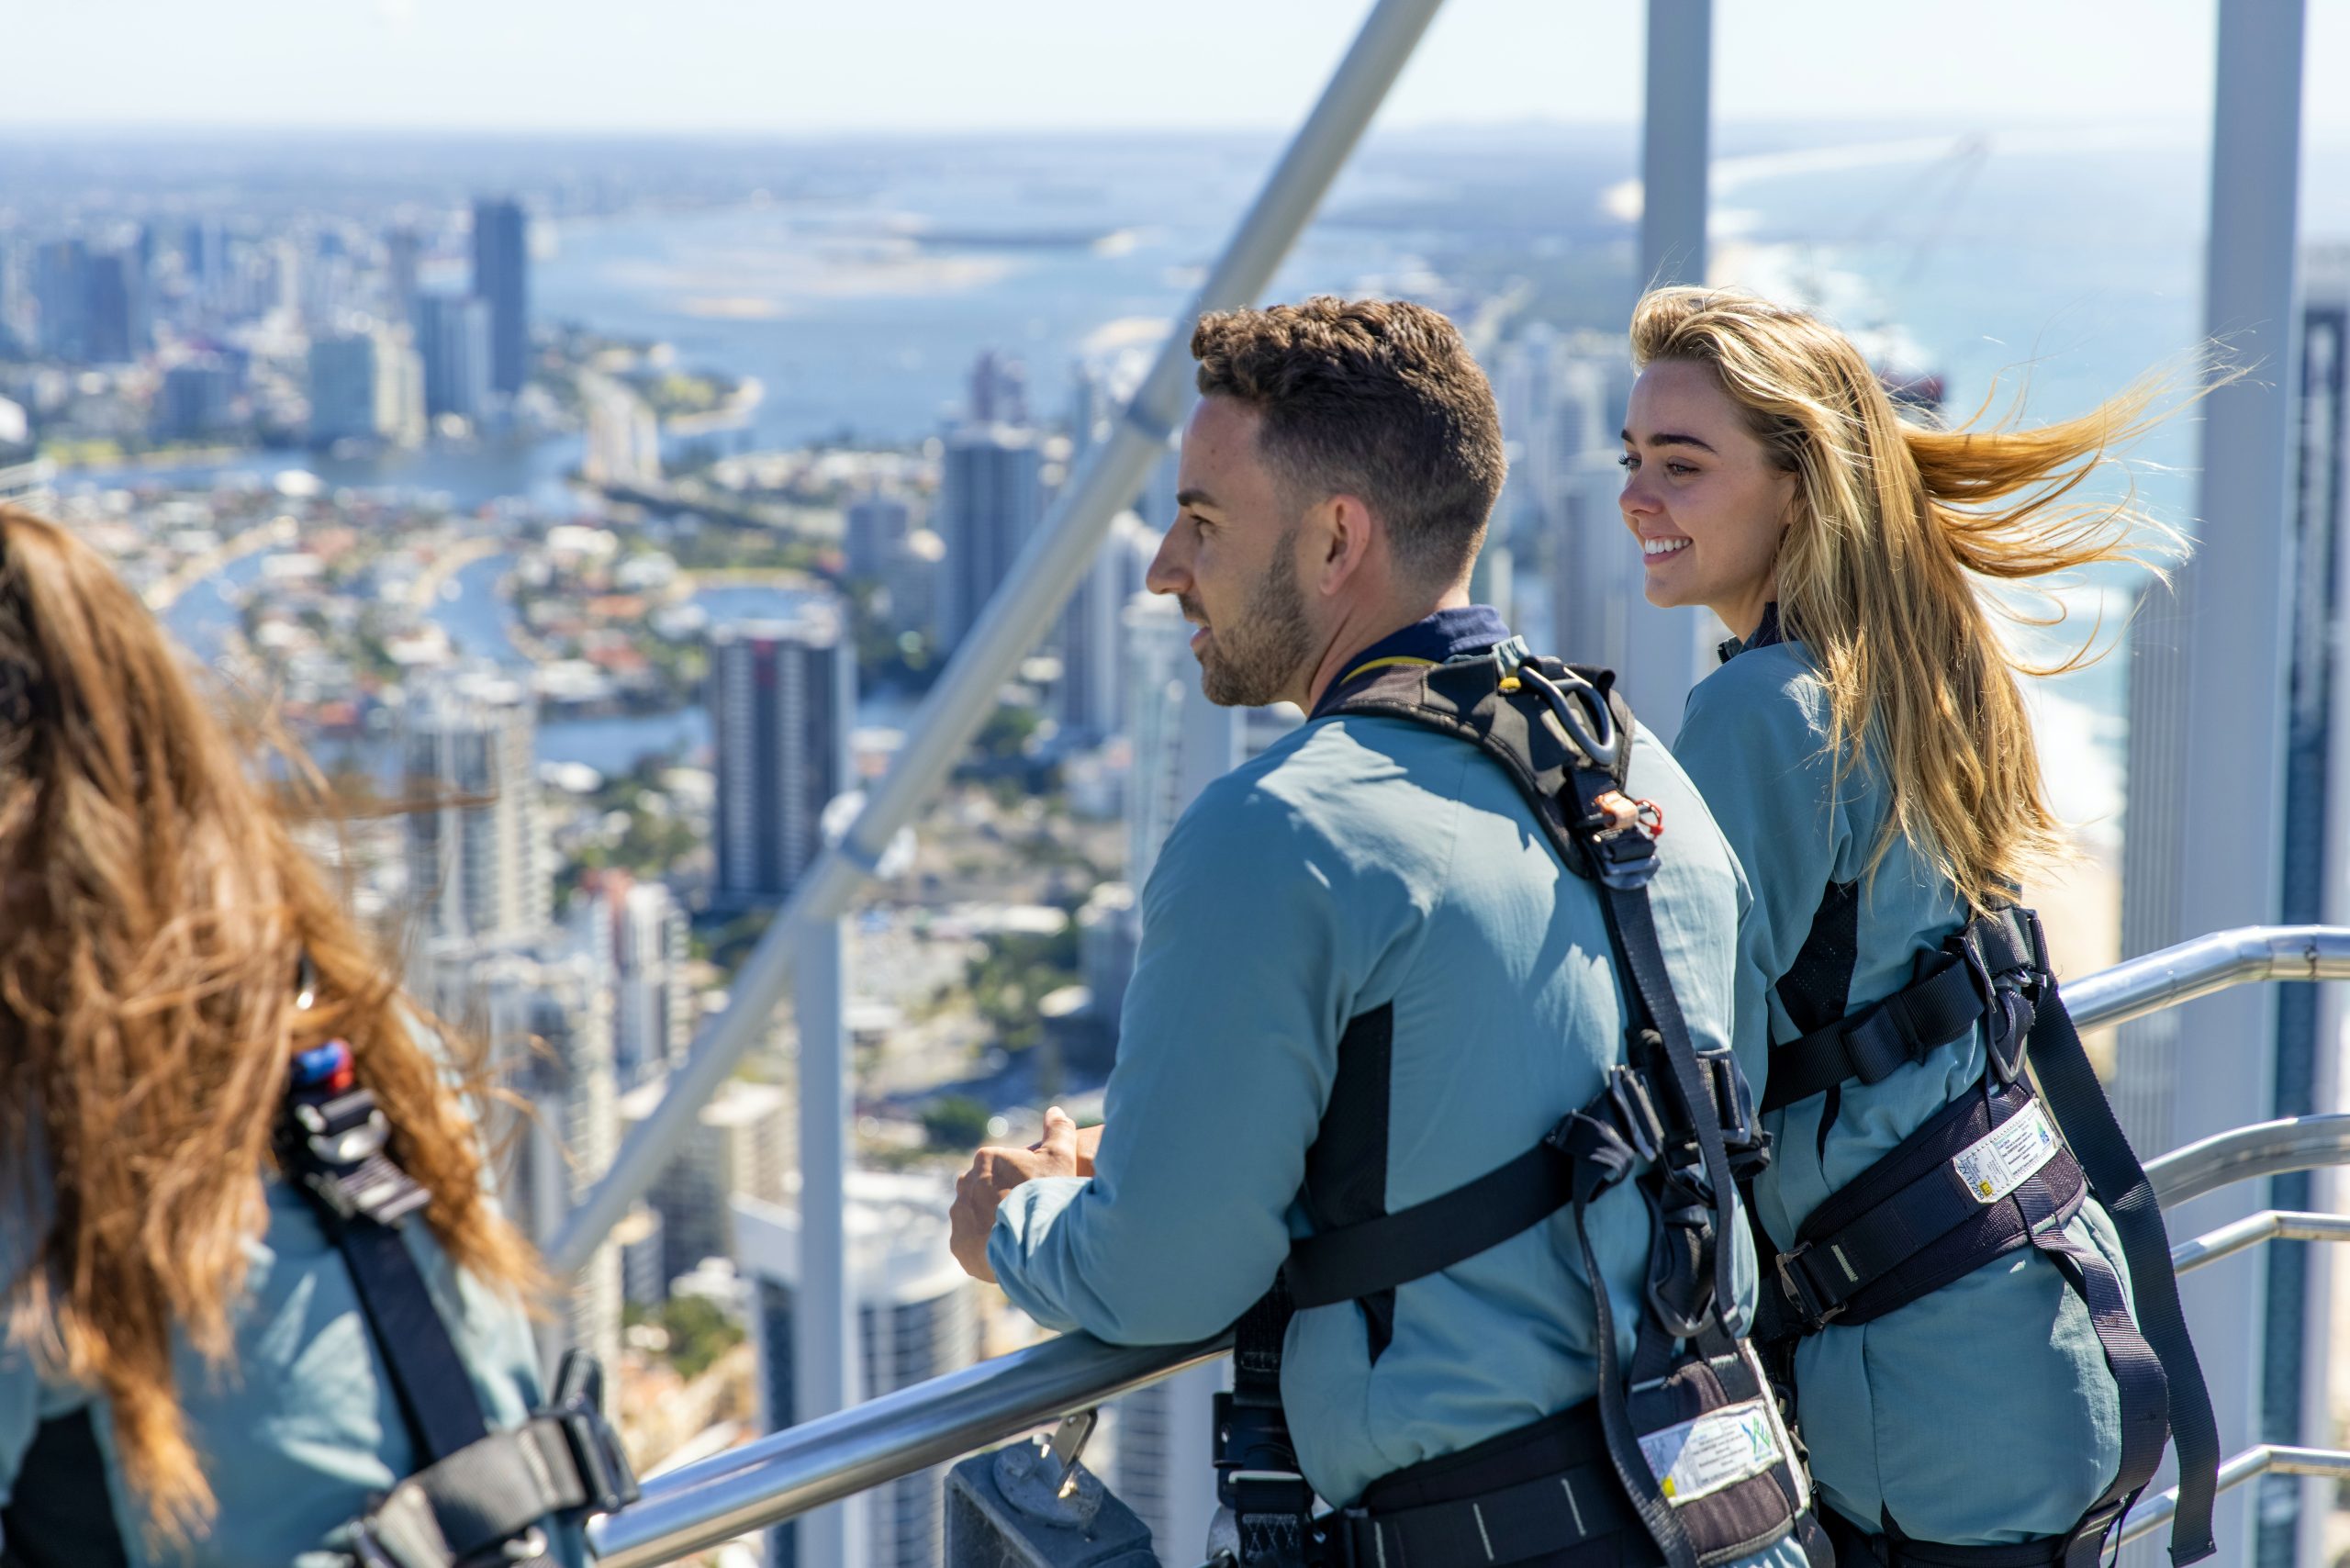 7 experience gifts on the Gold Coast